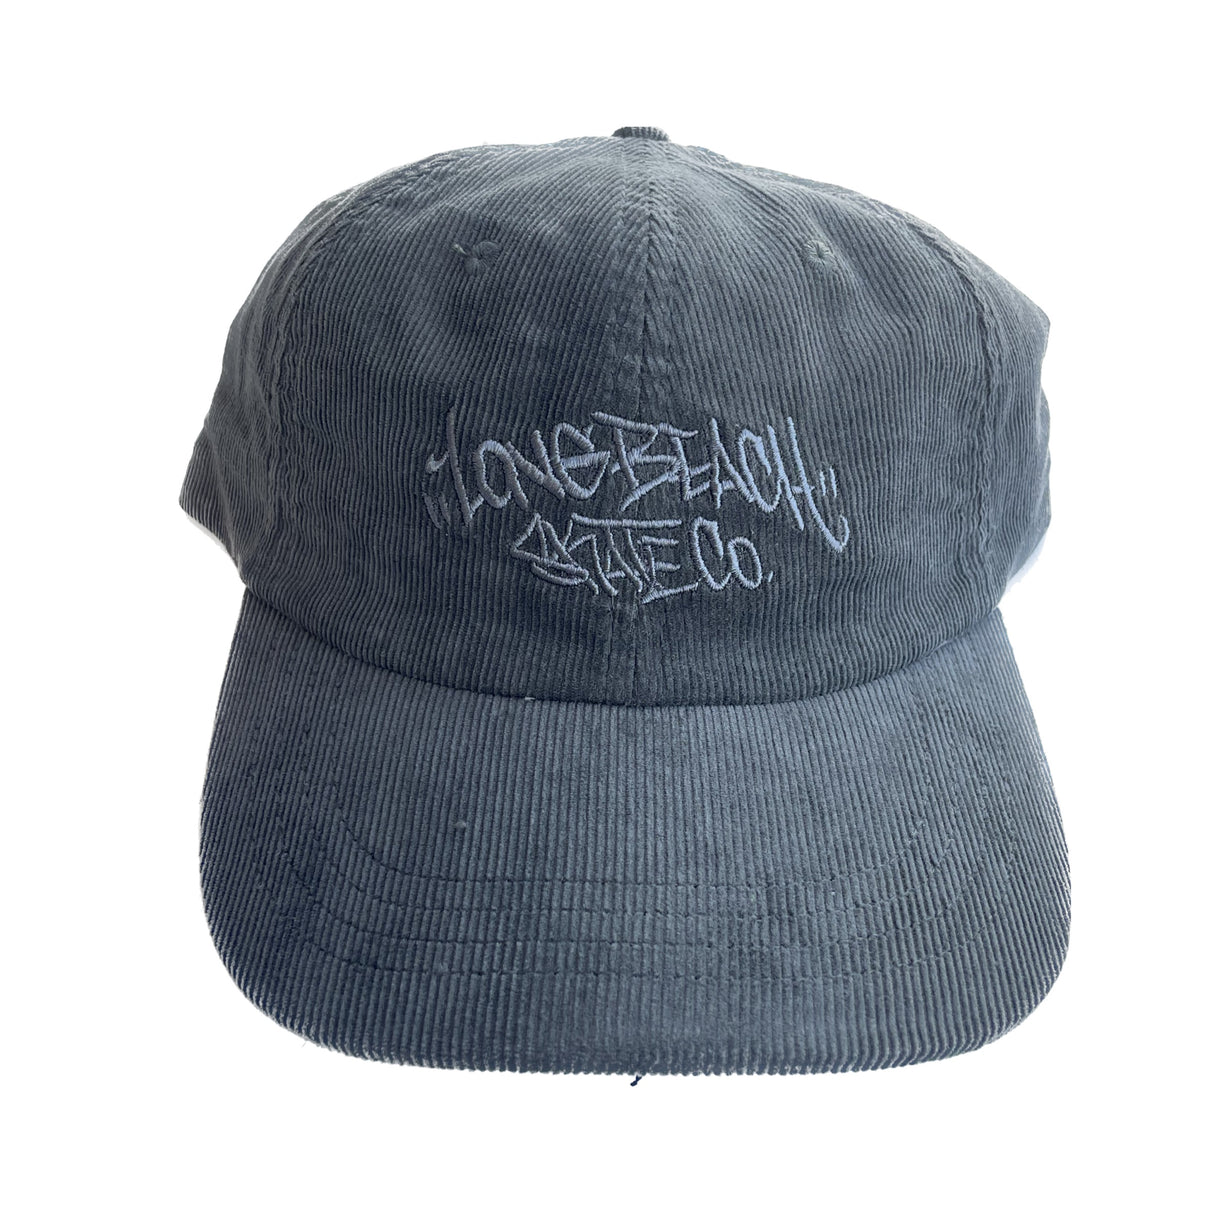 Long Beach Skate Co. Graffiti LBS Olive Corduroy Unstructured Dad Strapback Hat